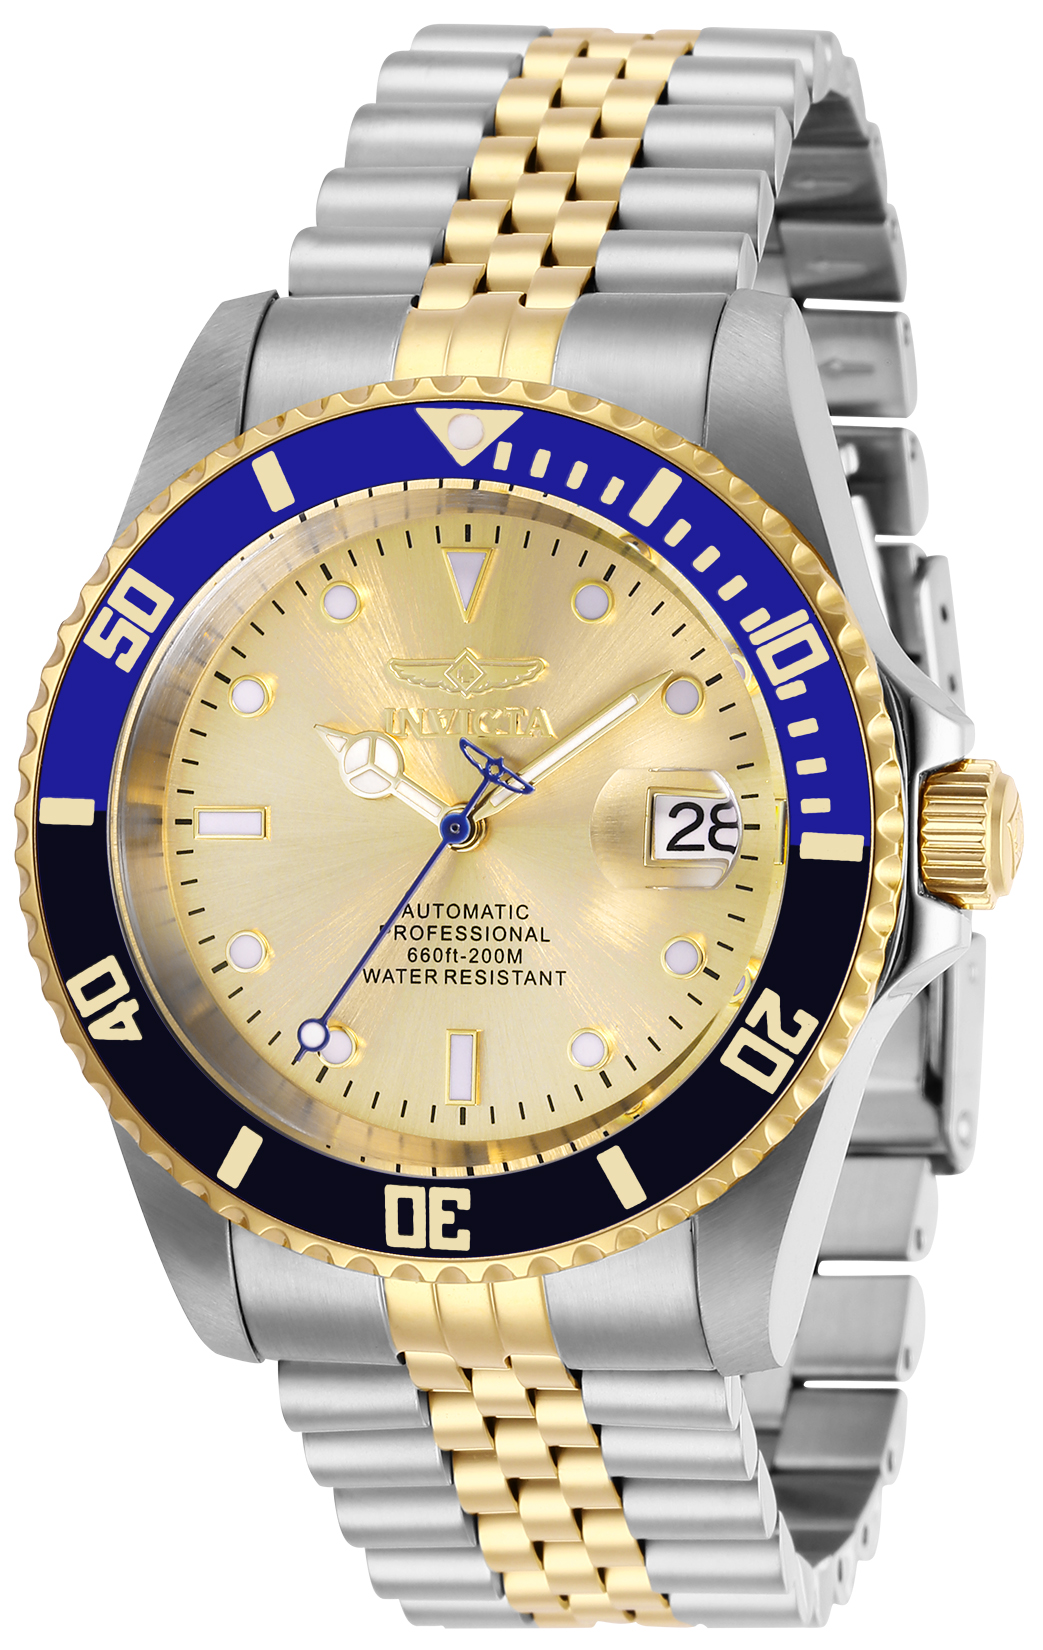 Invicta Pro Diver Automatic Men's Watch - 42mm, Steel, Gold (29181)